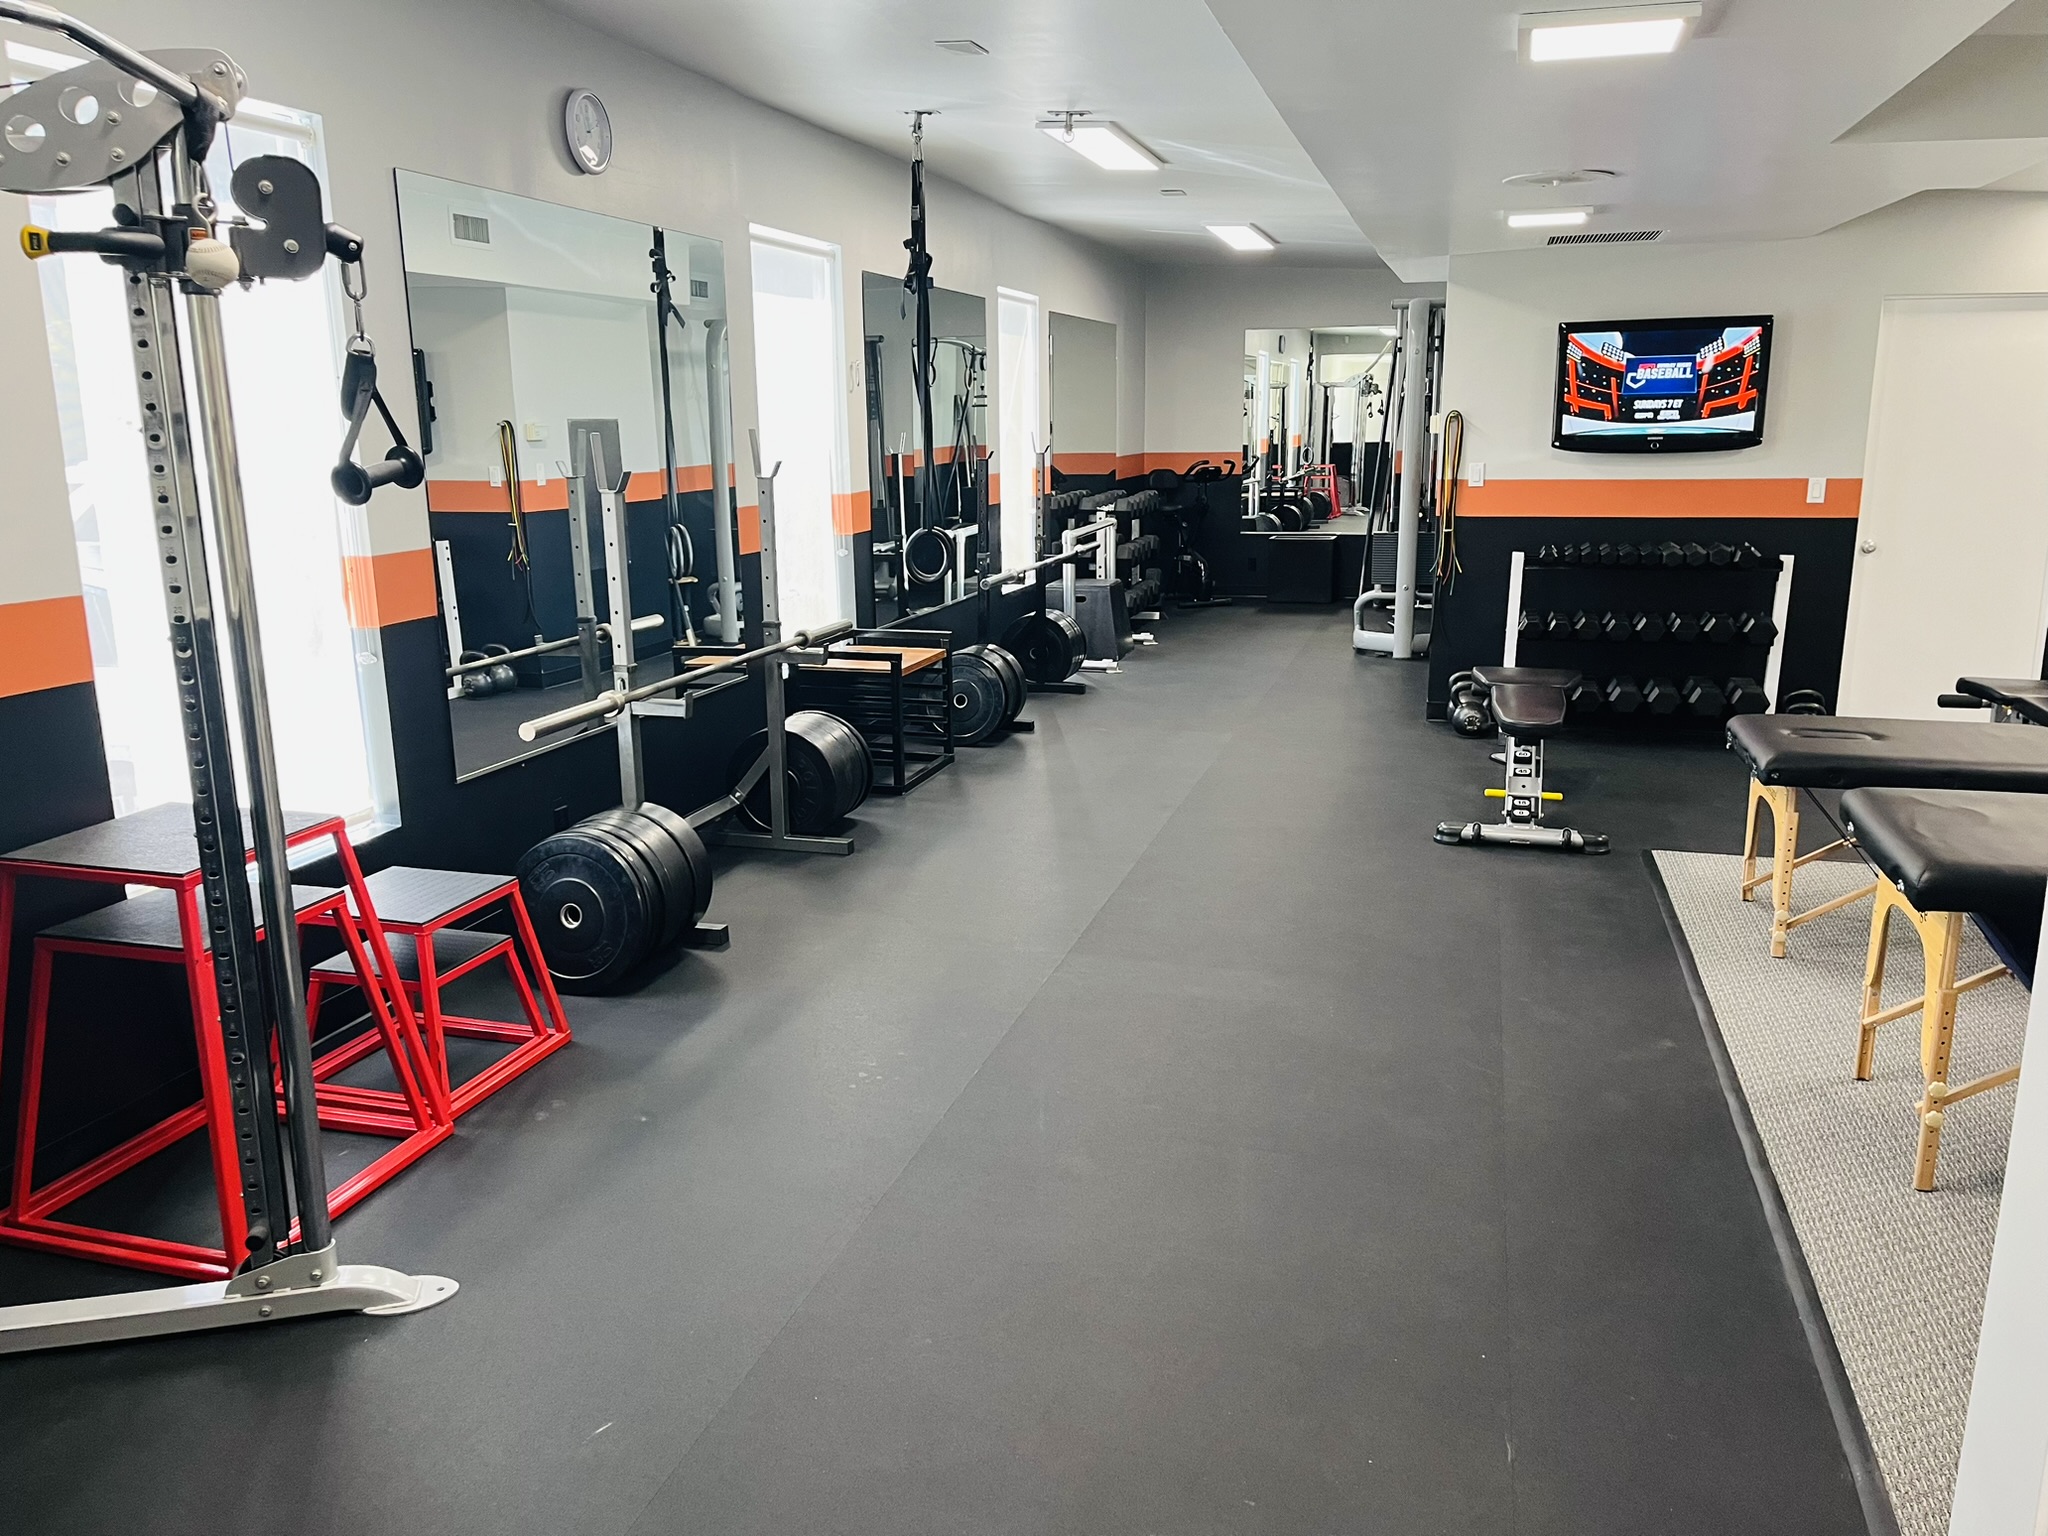 Interior of the gym at Premier Body Method Sports Medicine and Chiropractic office, equipped with a variety of weights and workout machines.